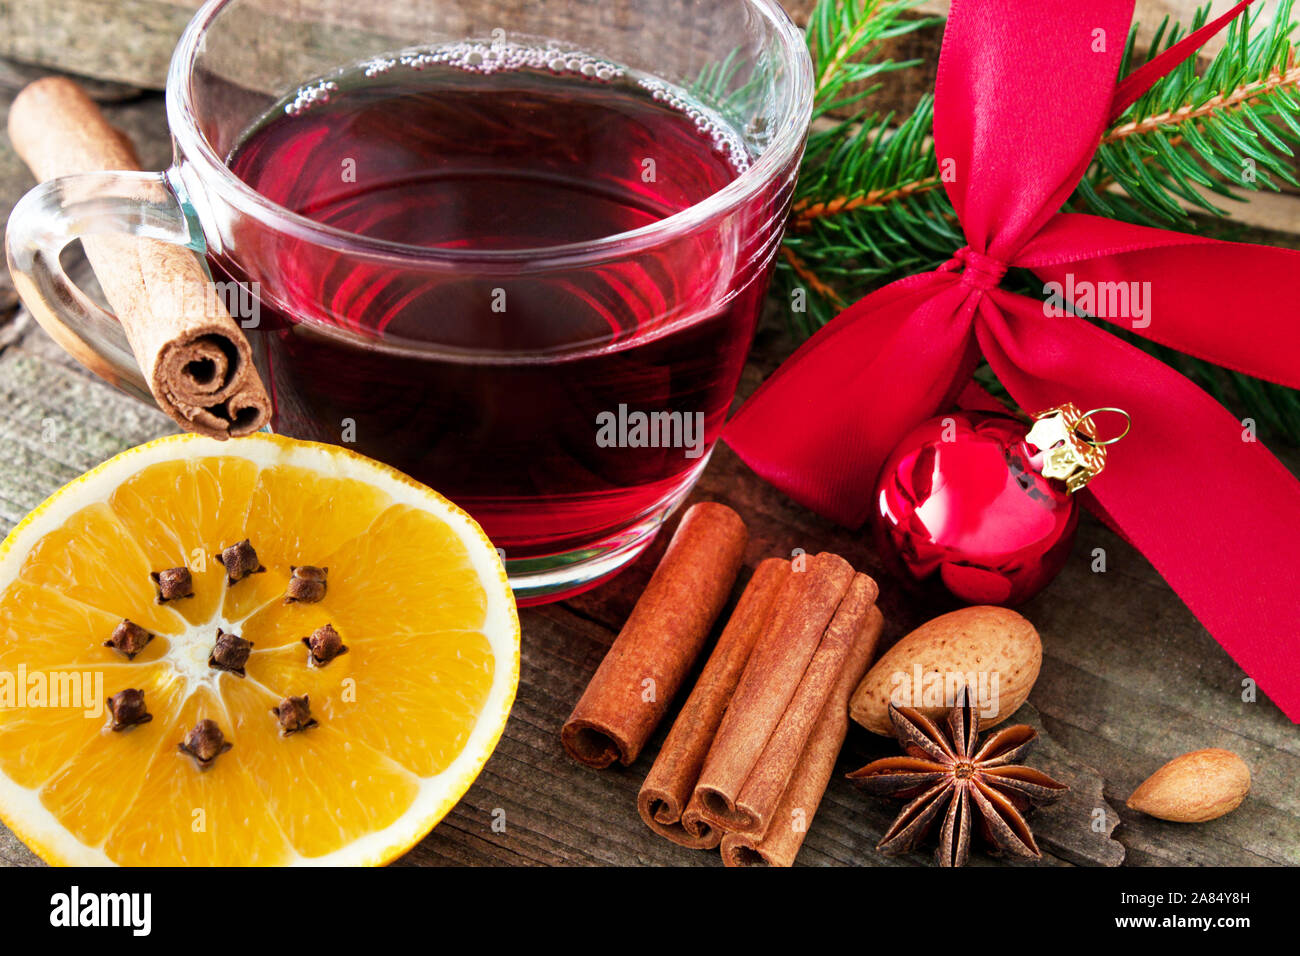 Hot spiced wine with cinnamon and oranges Stock Photo